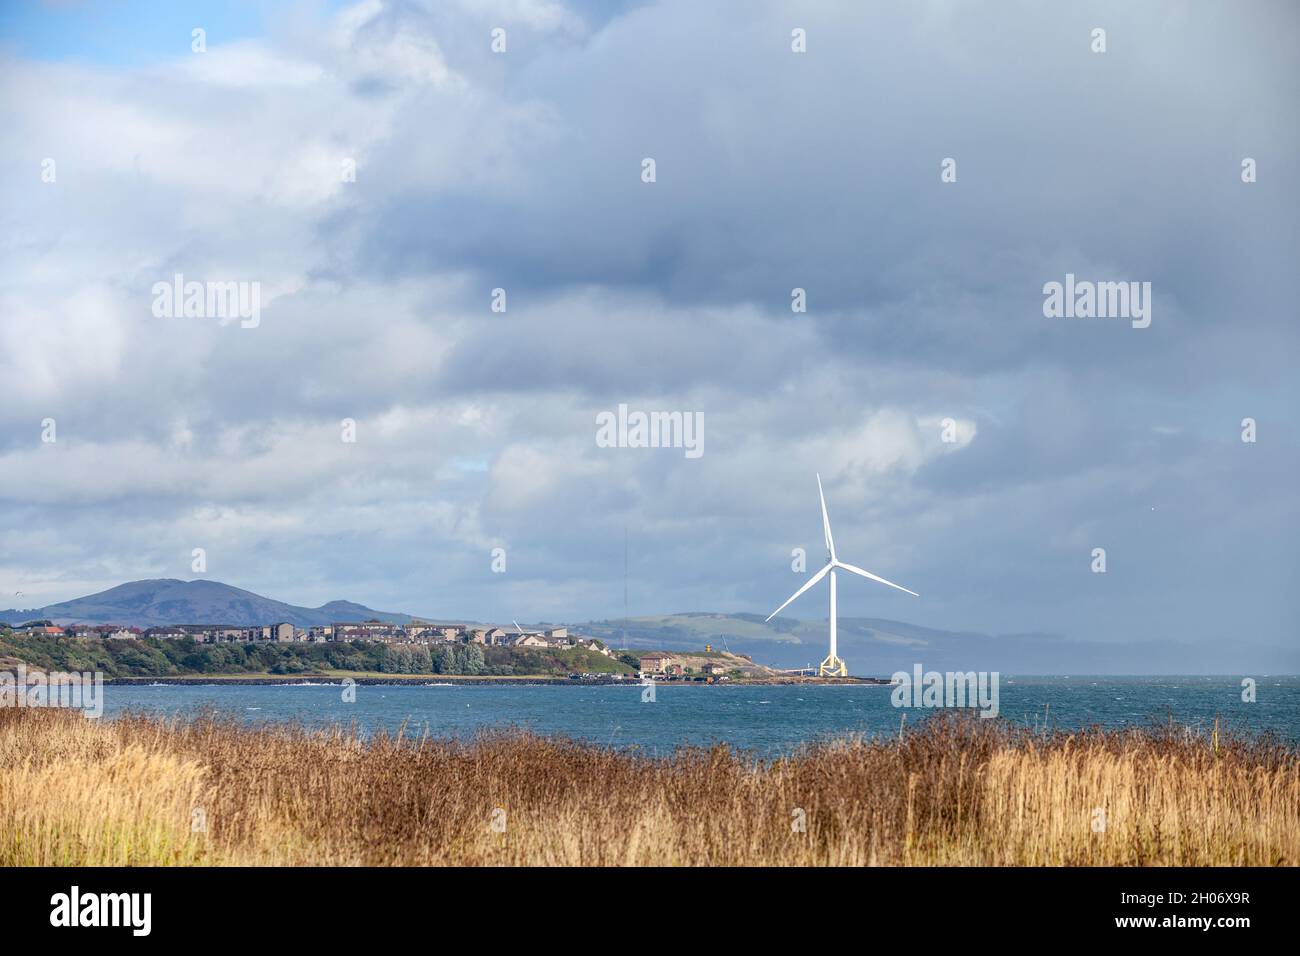 Looking towards the wind turbine at Buckaven from East Wemyss along the fife coastal path Stock Photo